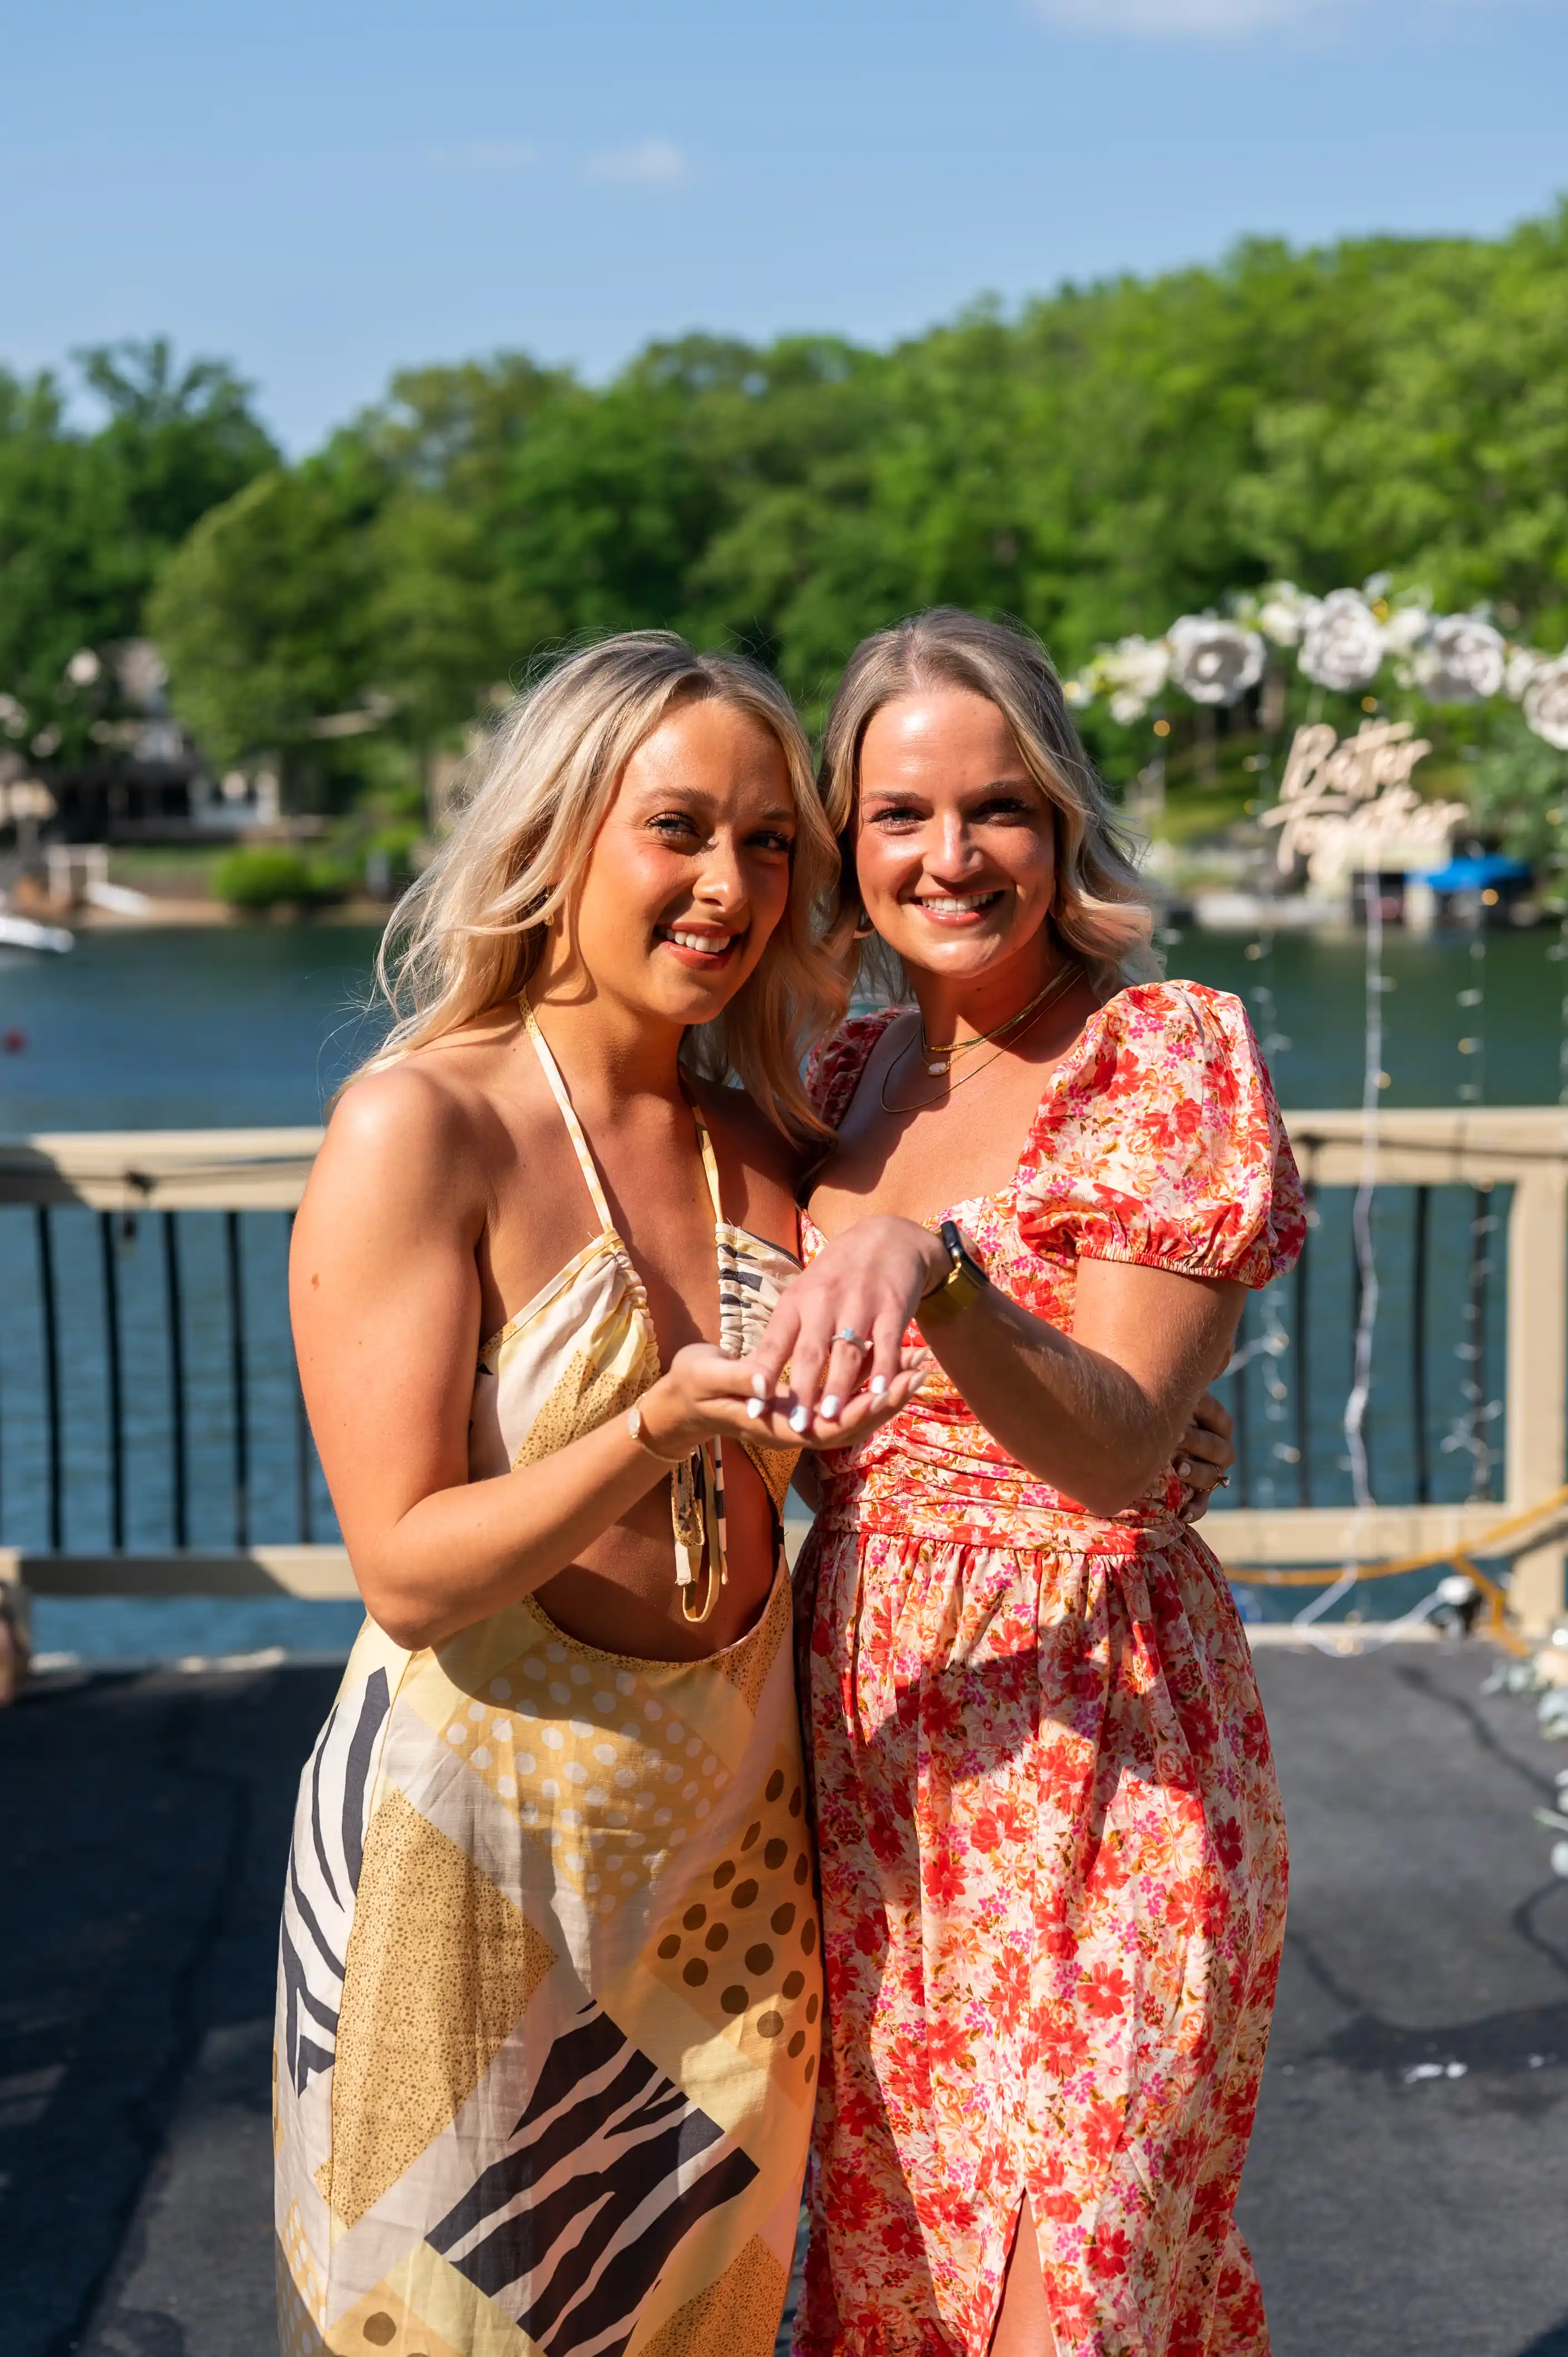 Two smiling women in summer dresses standing on a deck with a lake and trees in the background.